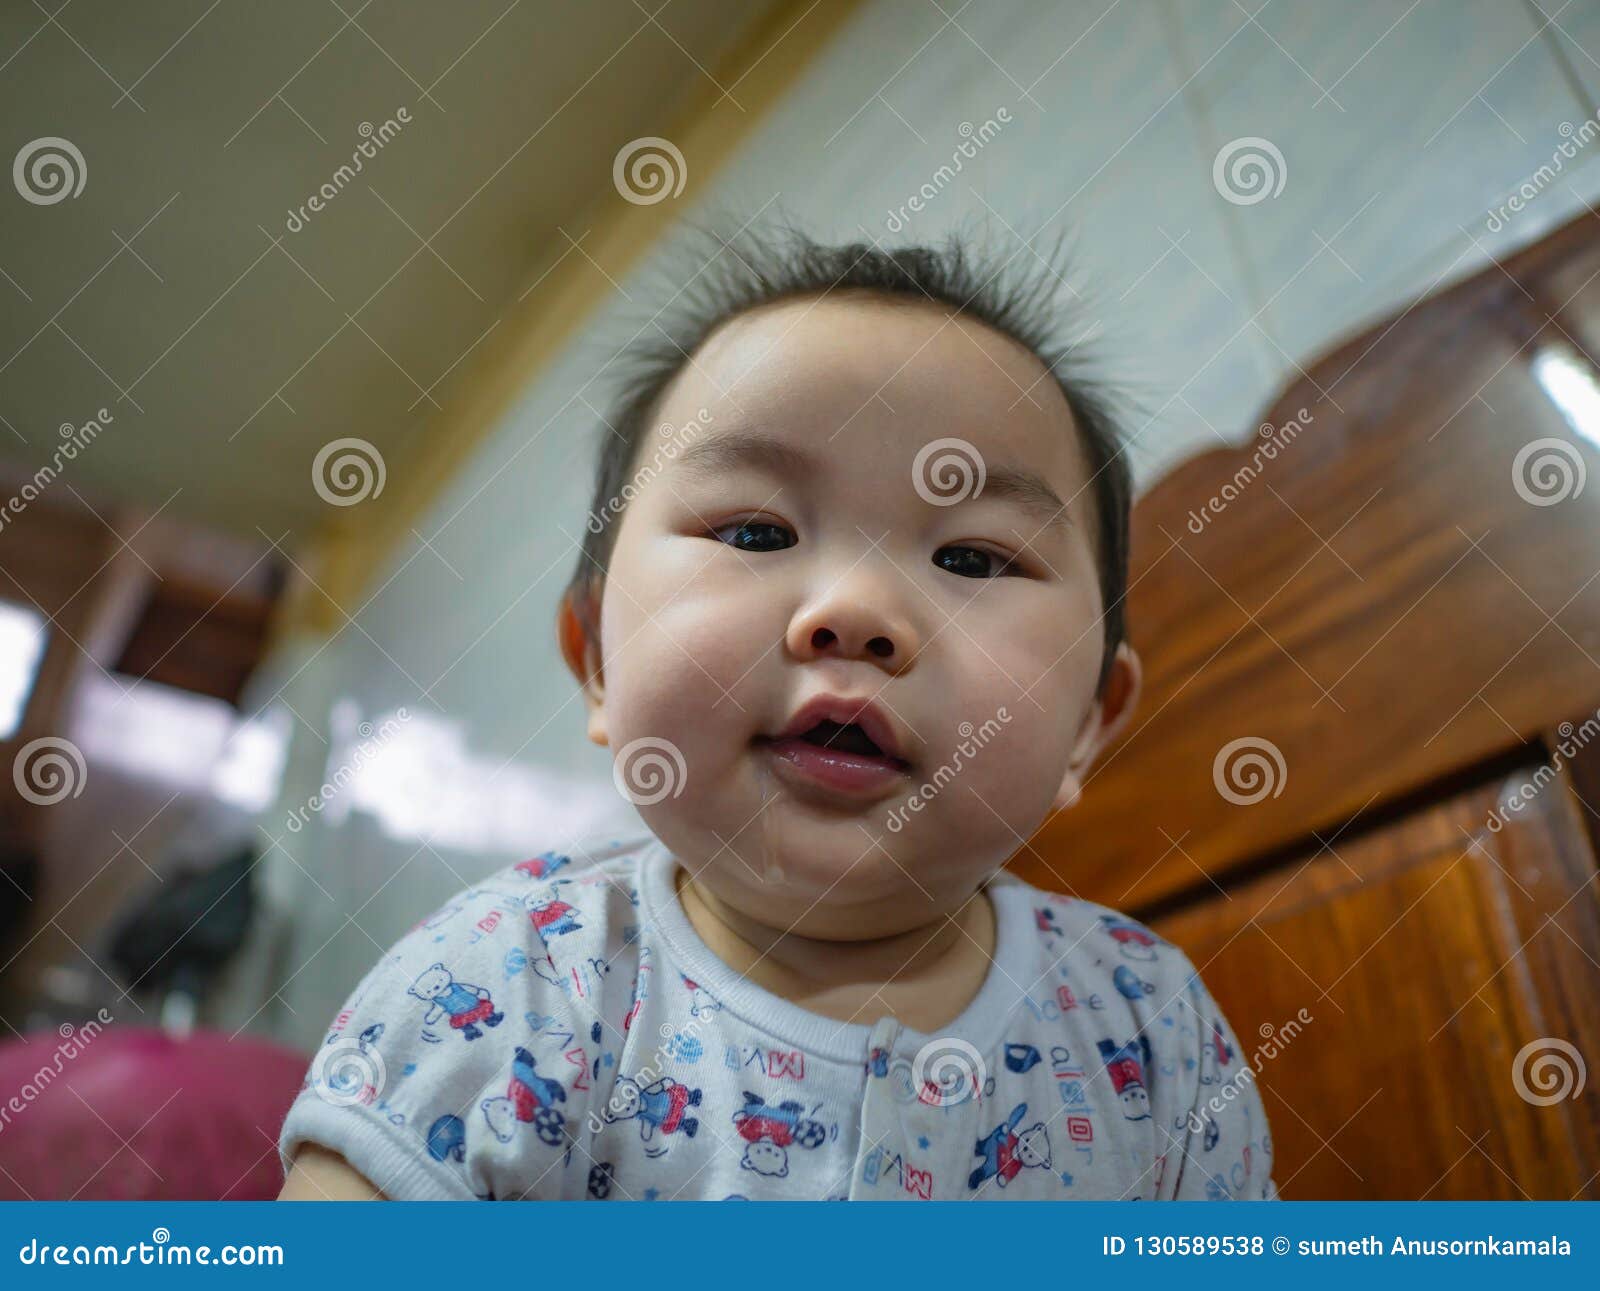 Cutie and Handsome Asian Boy Baby or Infant Stock Photo - Image of ...